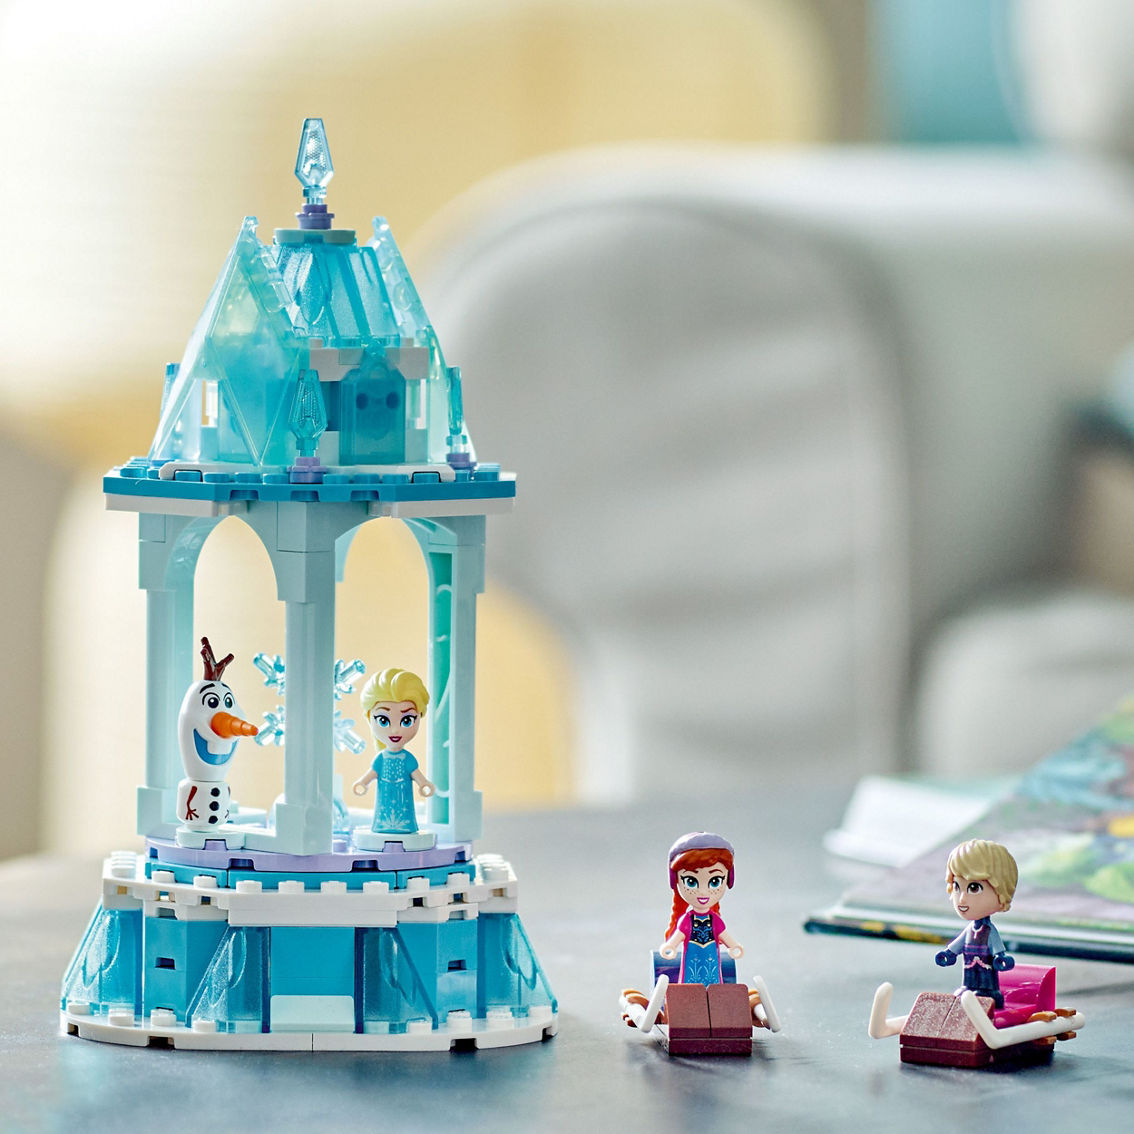 LEGO Disney Anna and Elsa's Magical Carousel 43218 Building Toy Set - Image 7 of 9